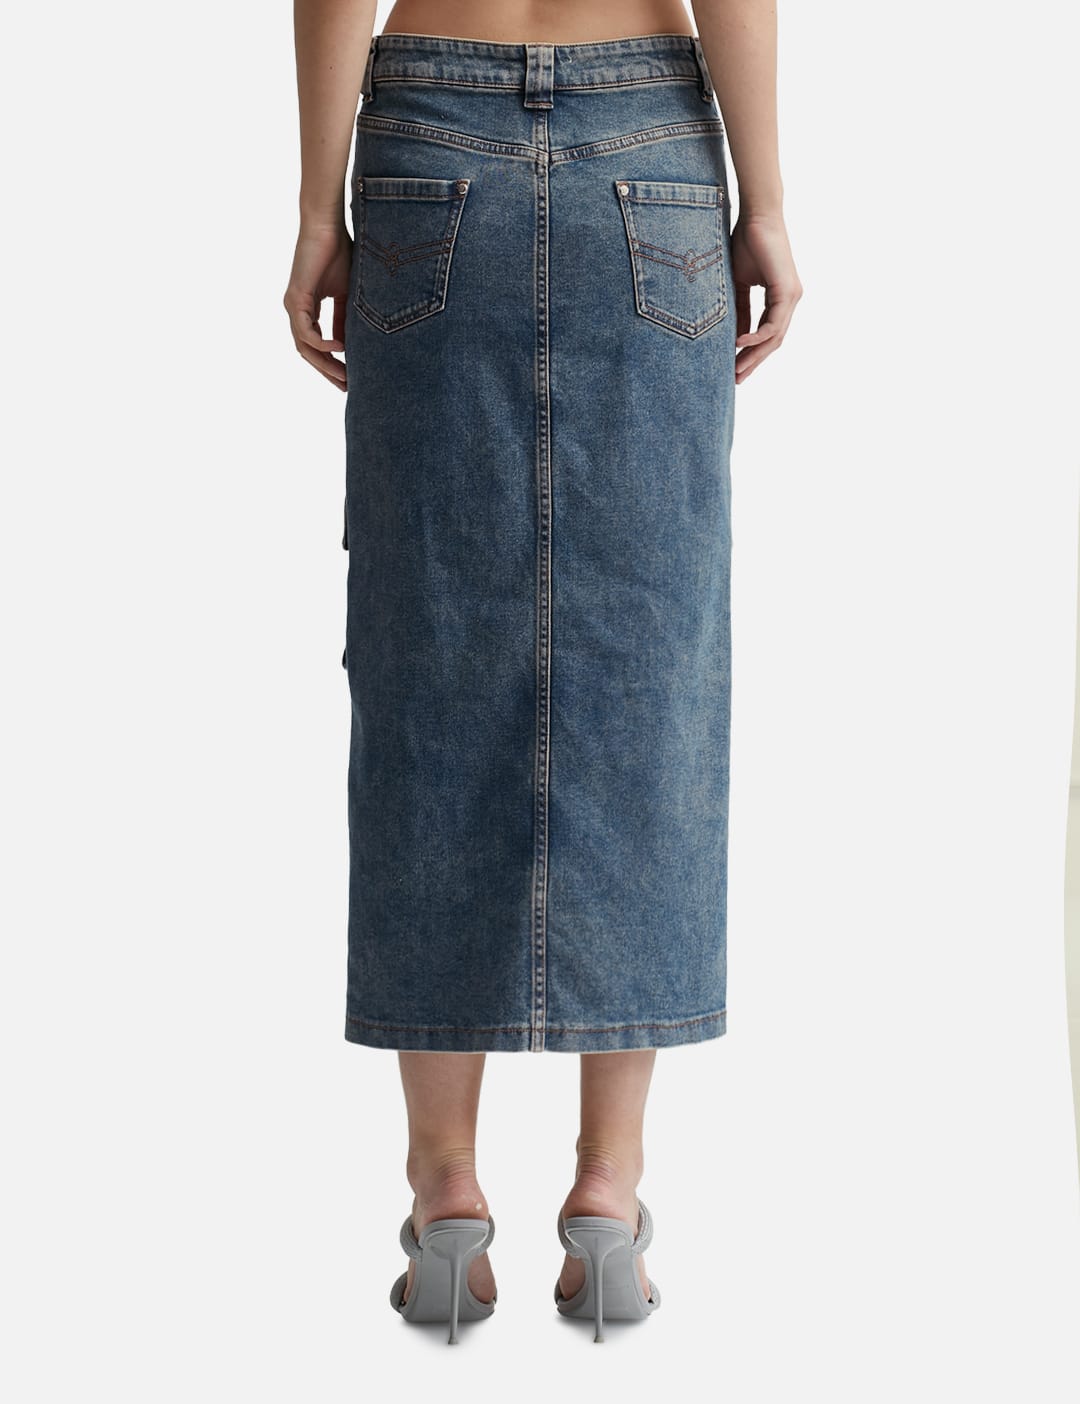 Come As You Are long flared denim skirt | Free People | Women's Denim Skirts  | Summer | Simons